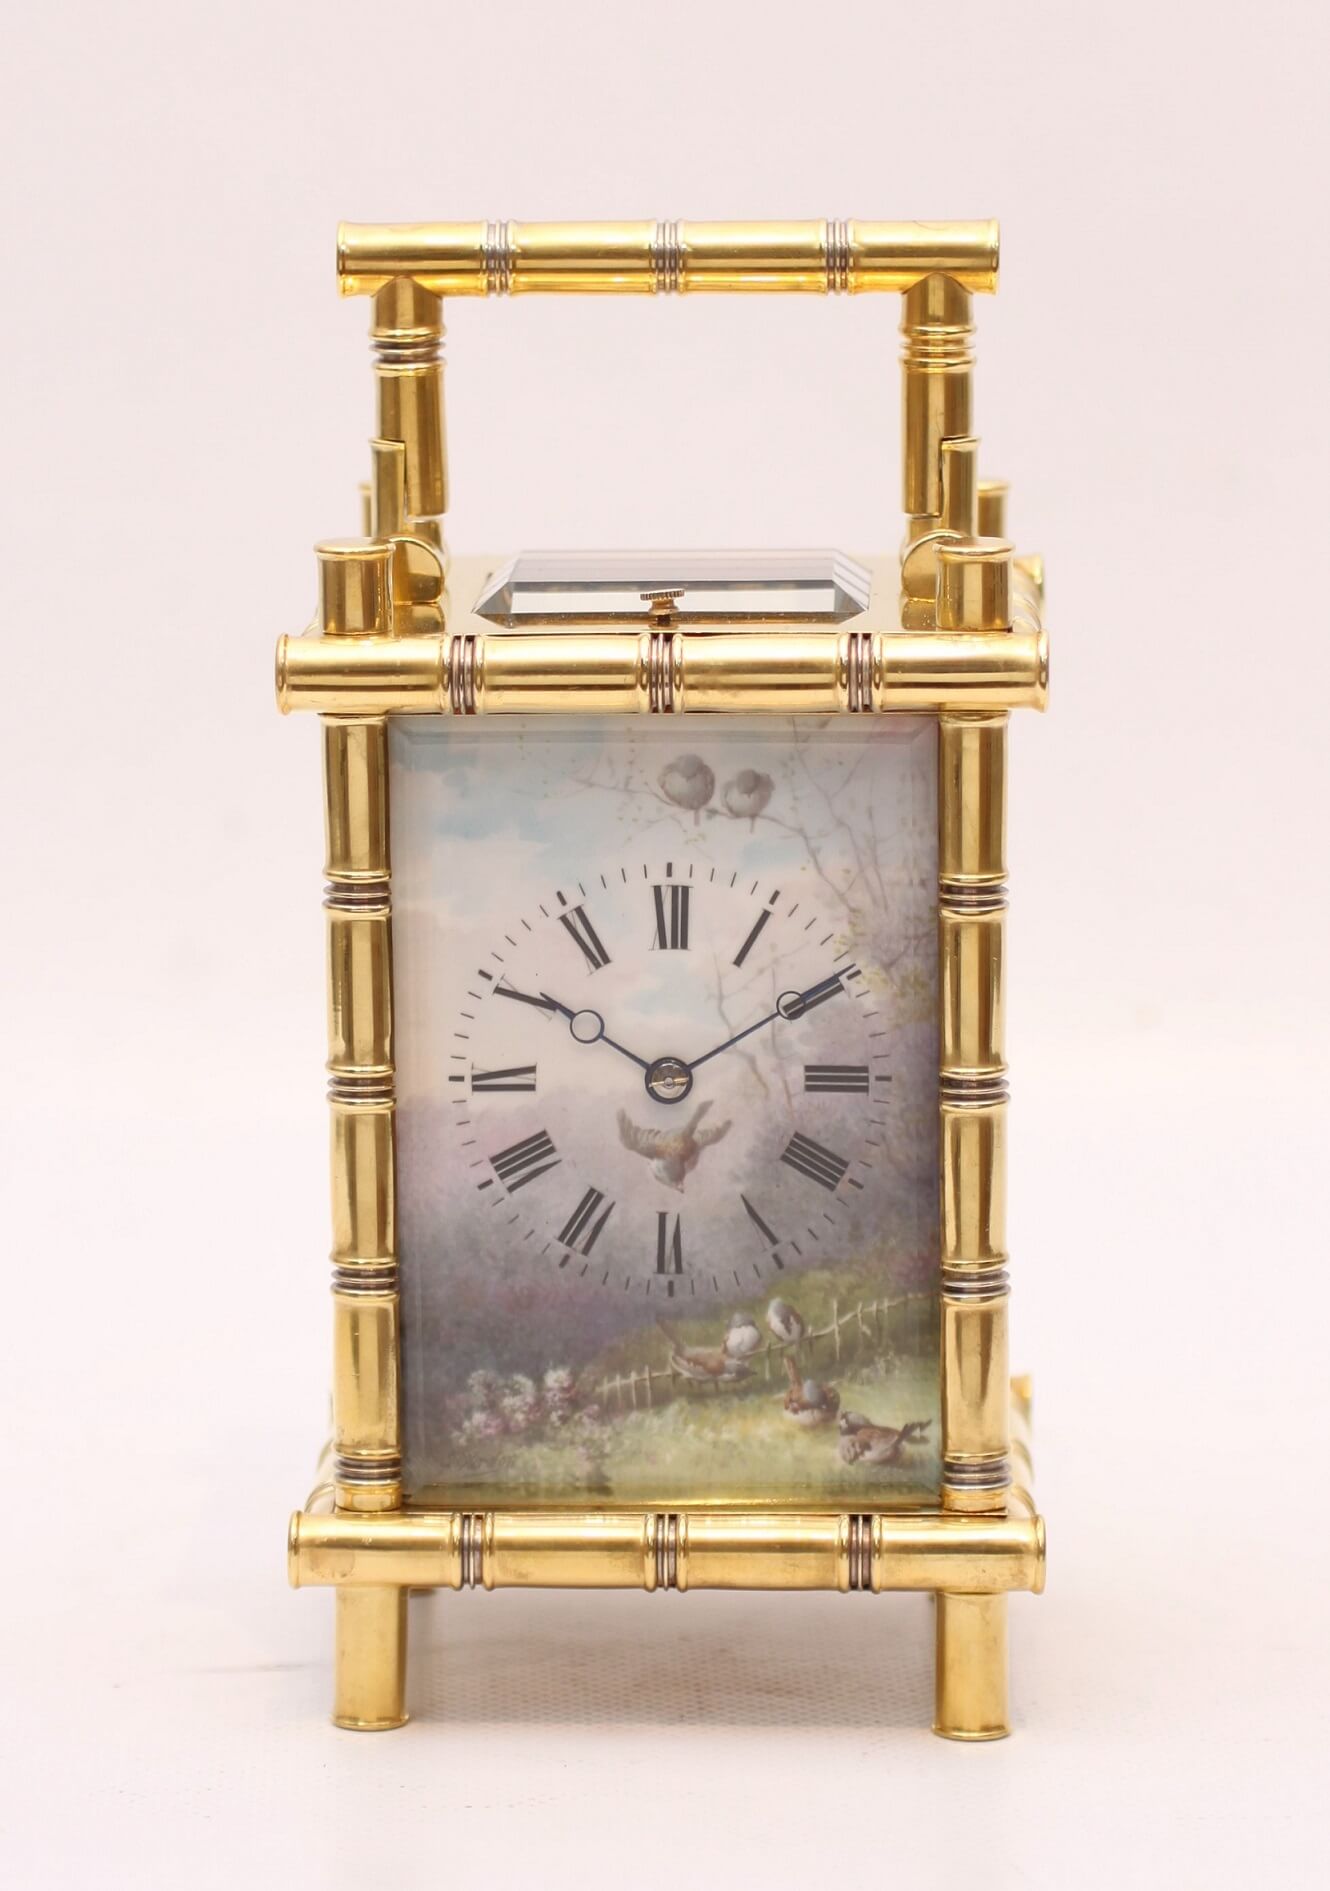 French bamboo style carriage clock porcelain sevres antique